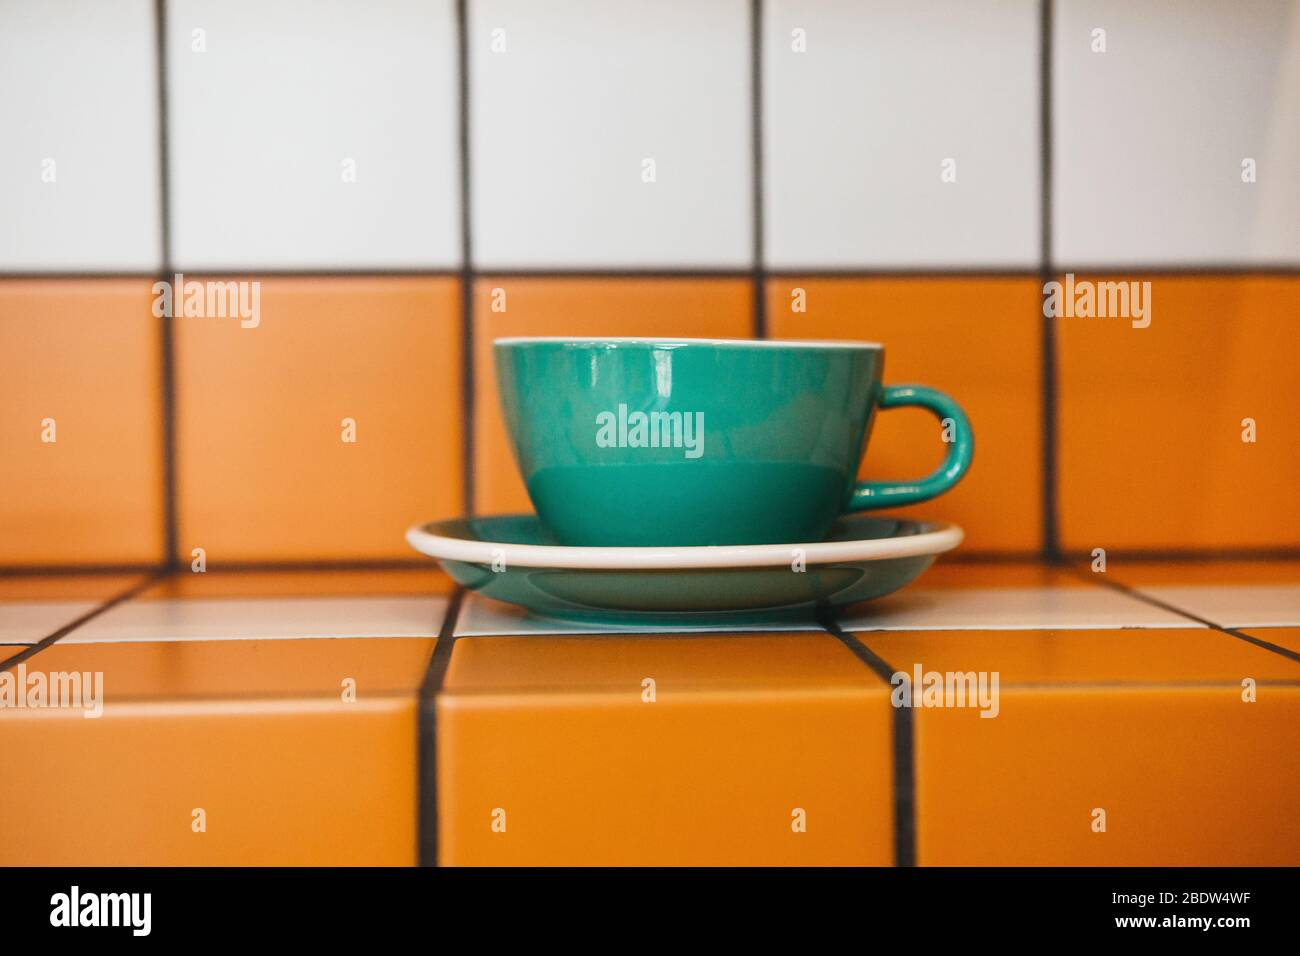 Close up of hot tea or coffee drink in a trendy green color cup on a table of orange and white ceramic tiles. Stock Photo